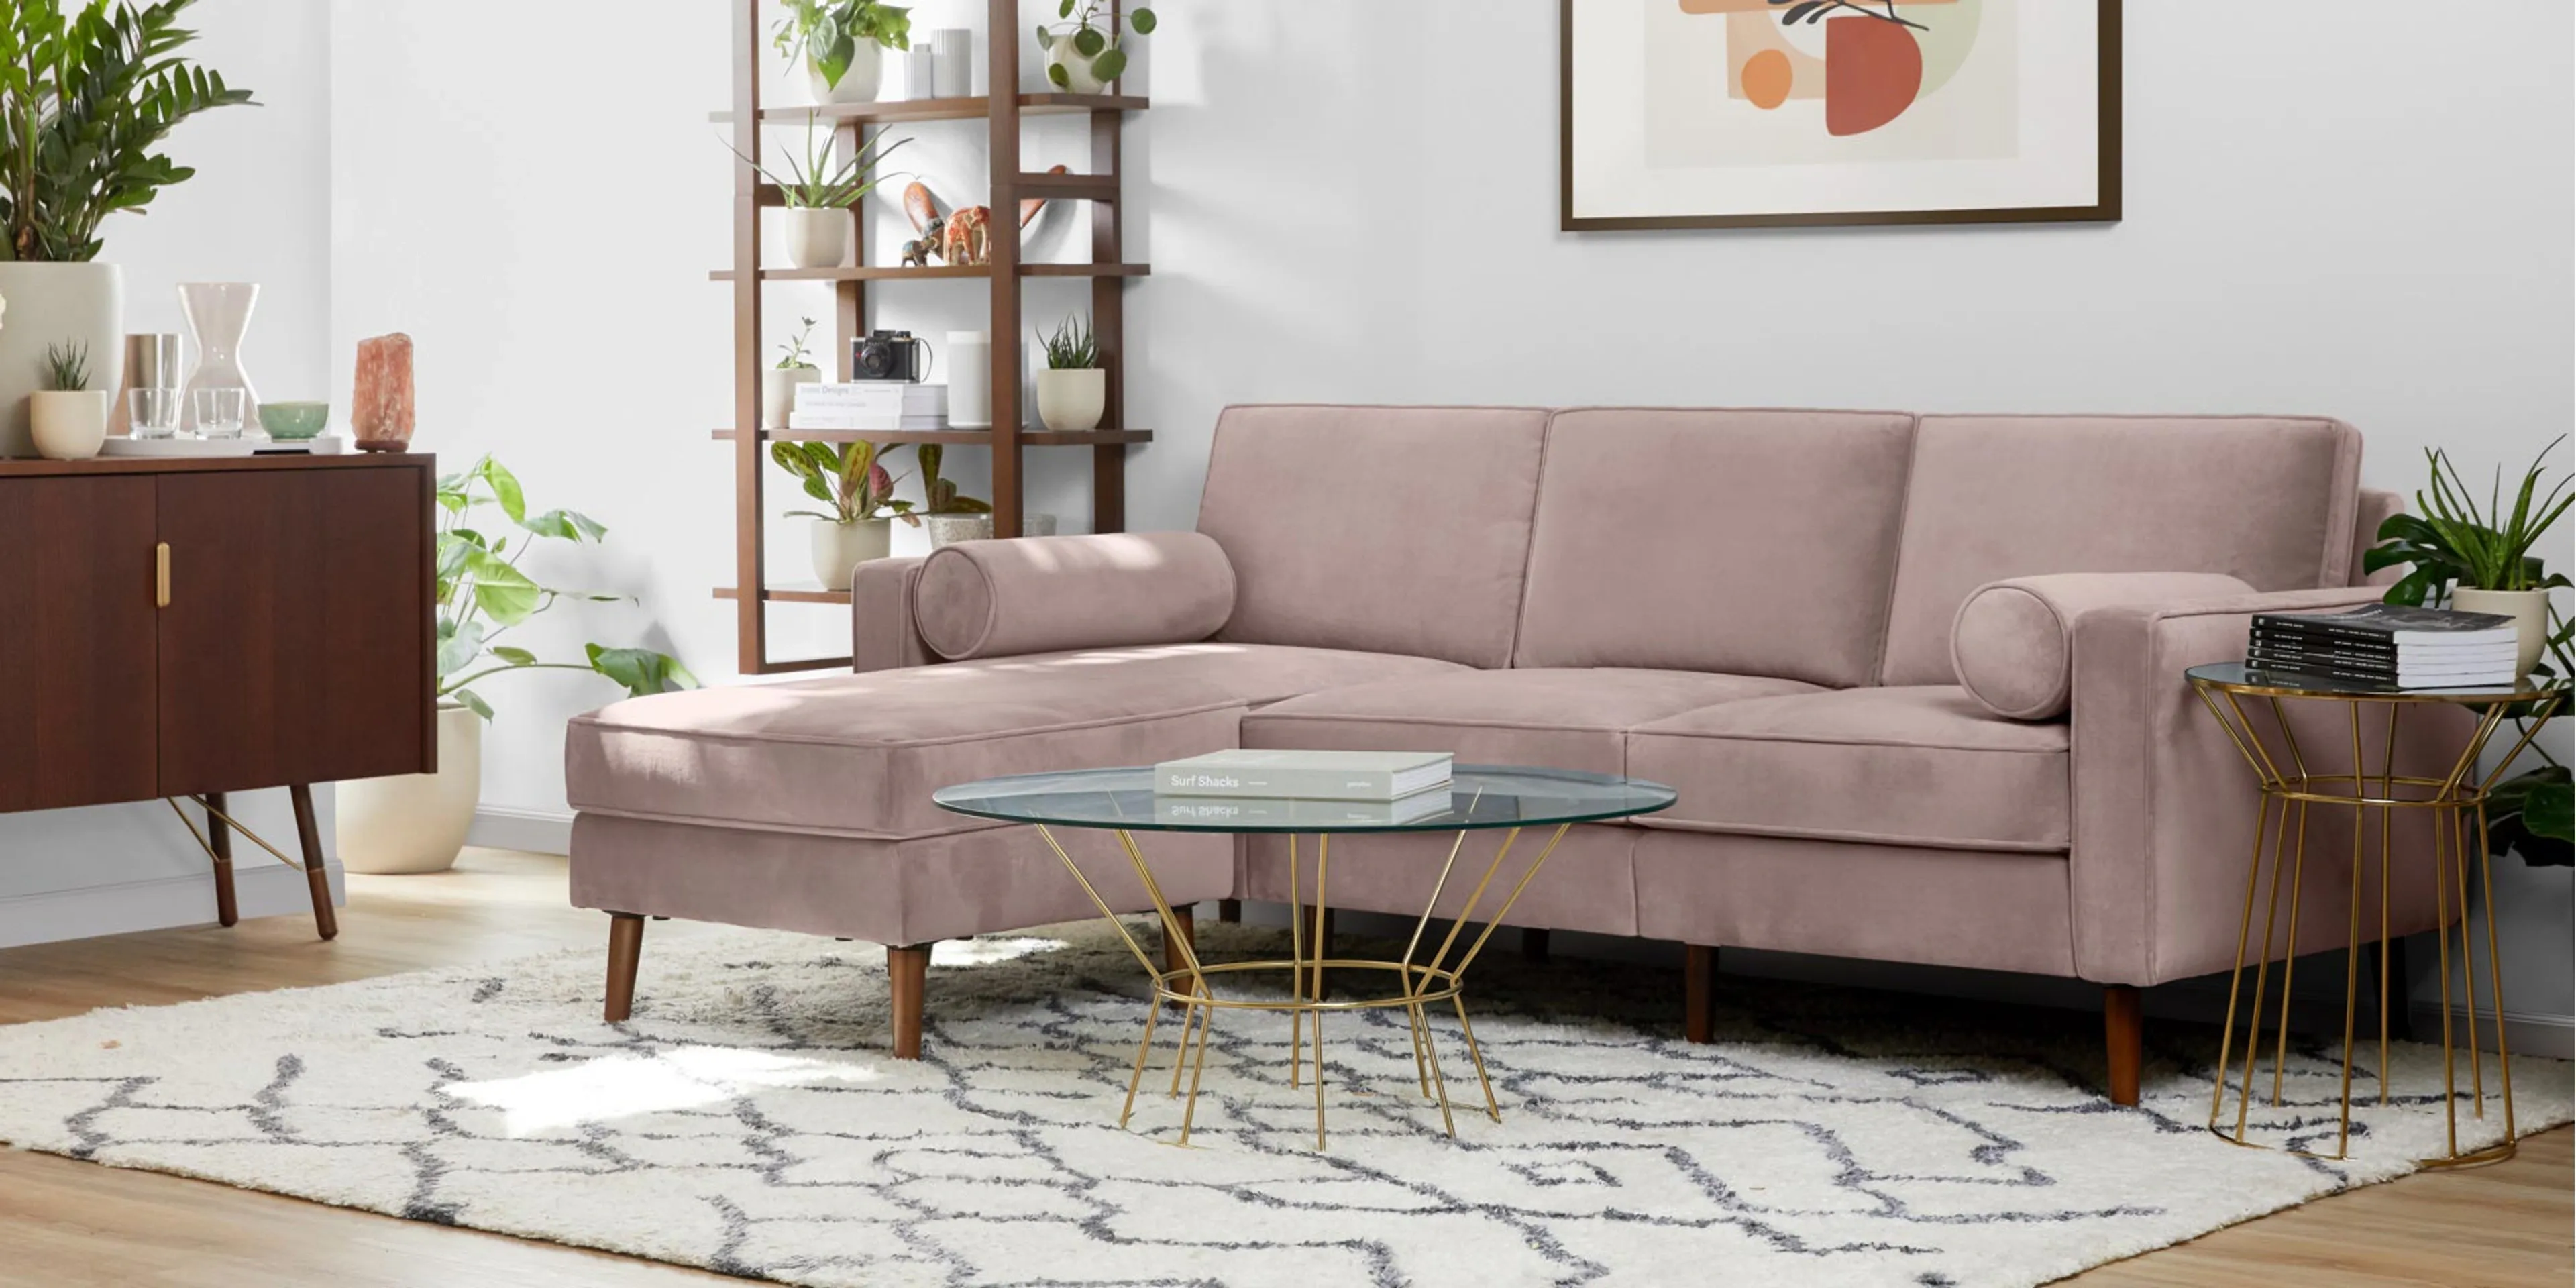 A botanical, bohemian living area, with a dusk-colored velvet sectional